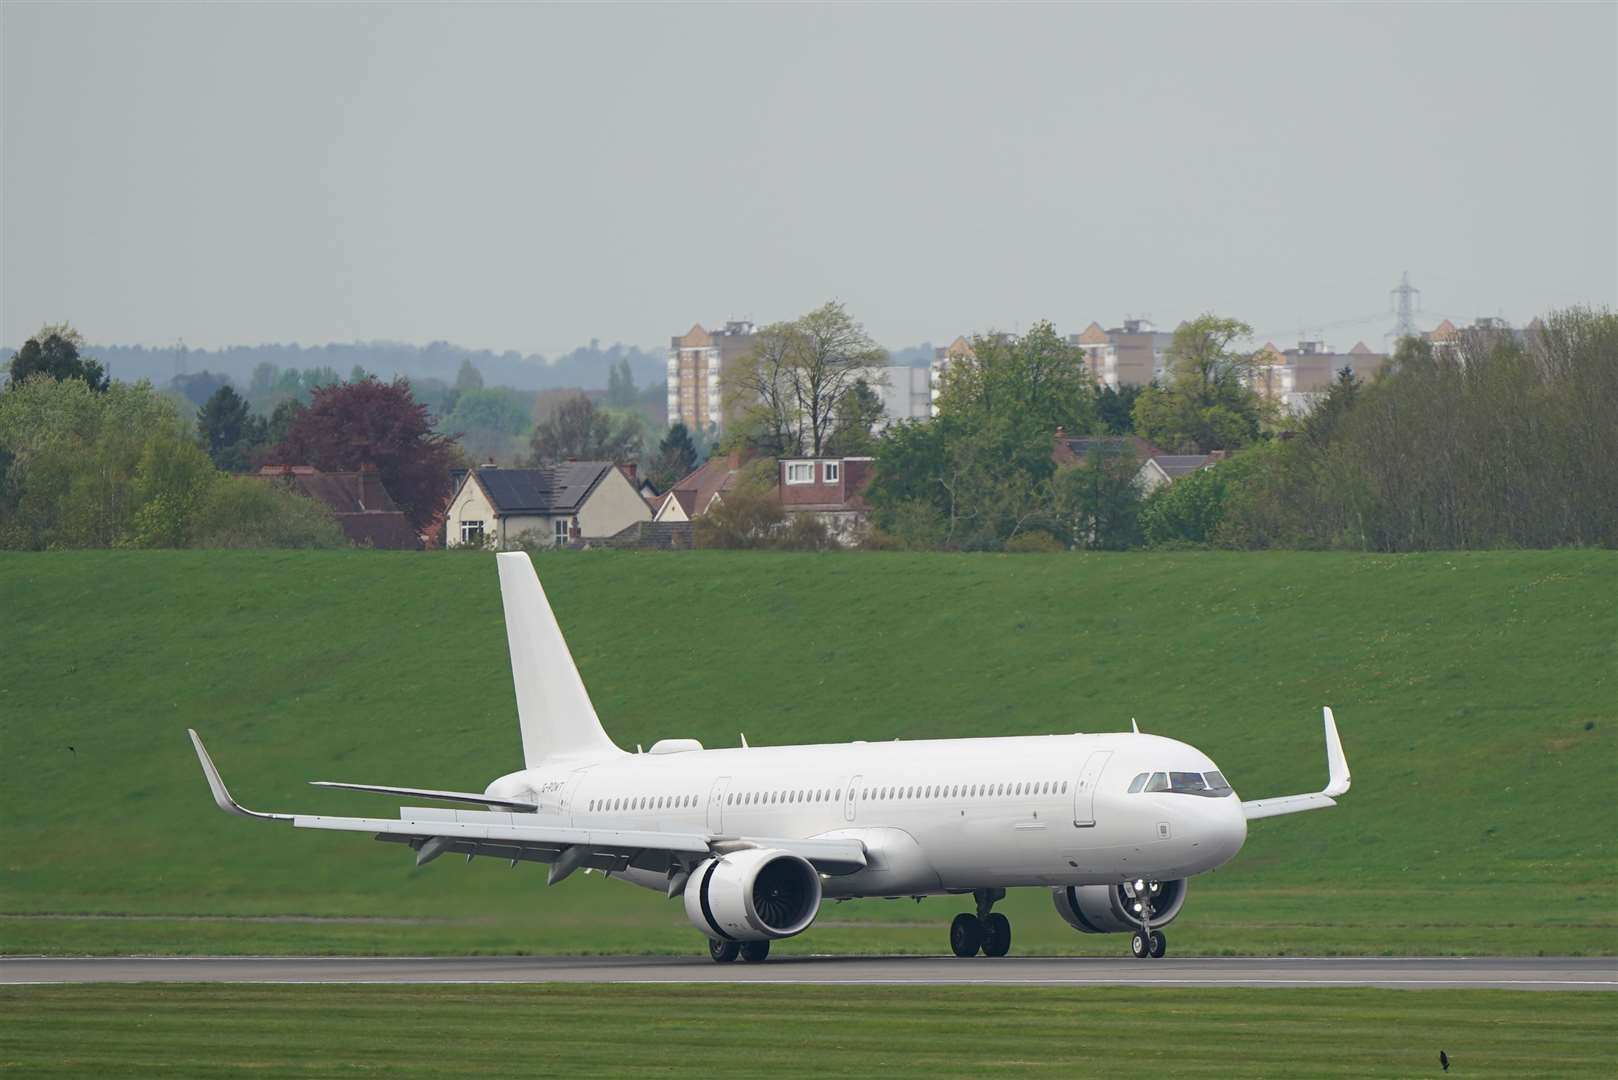 A plane with people evacuated from Sudan via Cyprus touches down at Birmingham airport on Tuesday (Joe Giddens/PA)